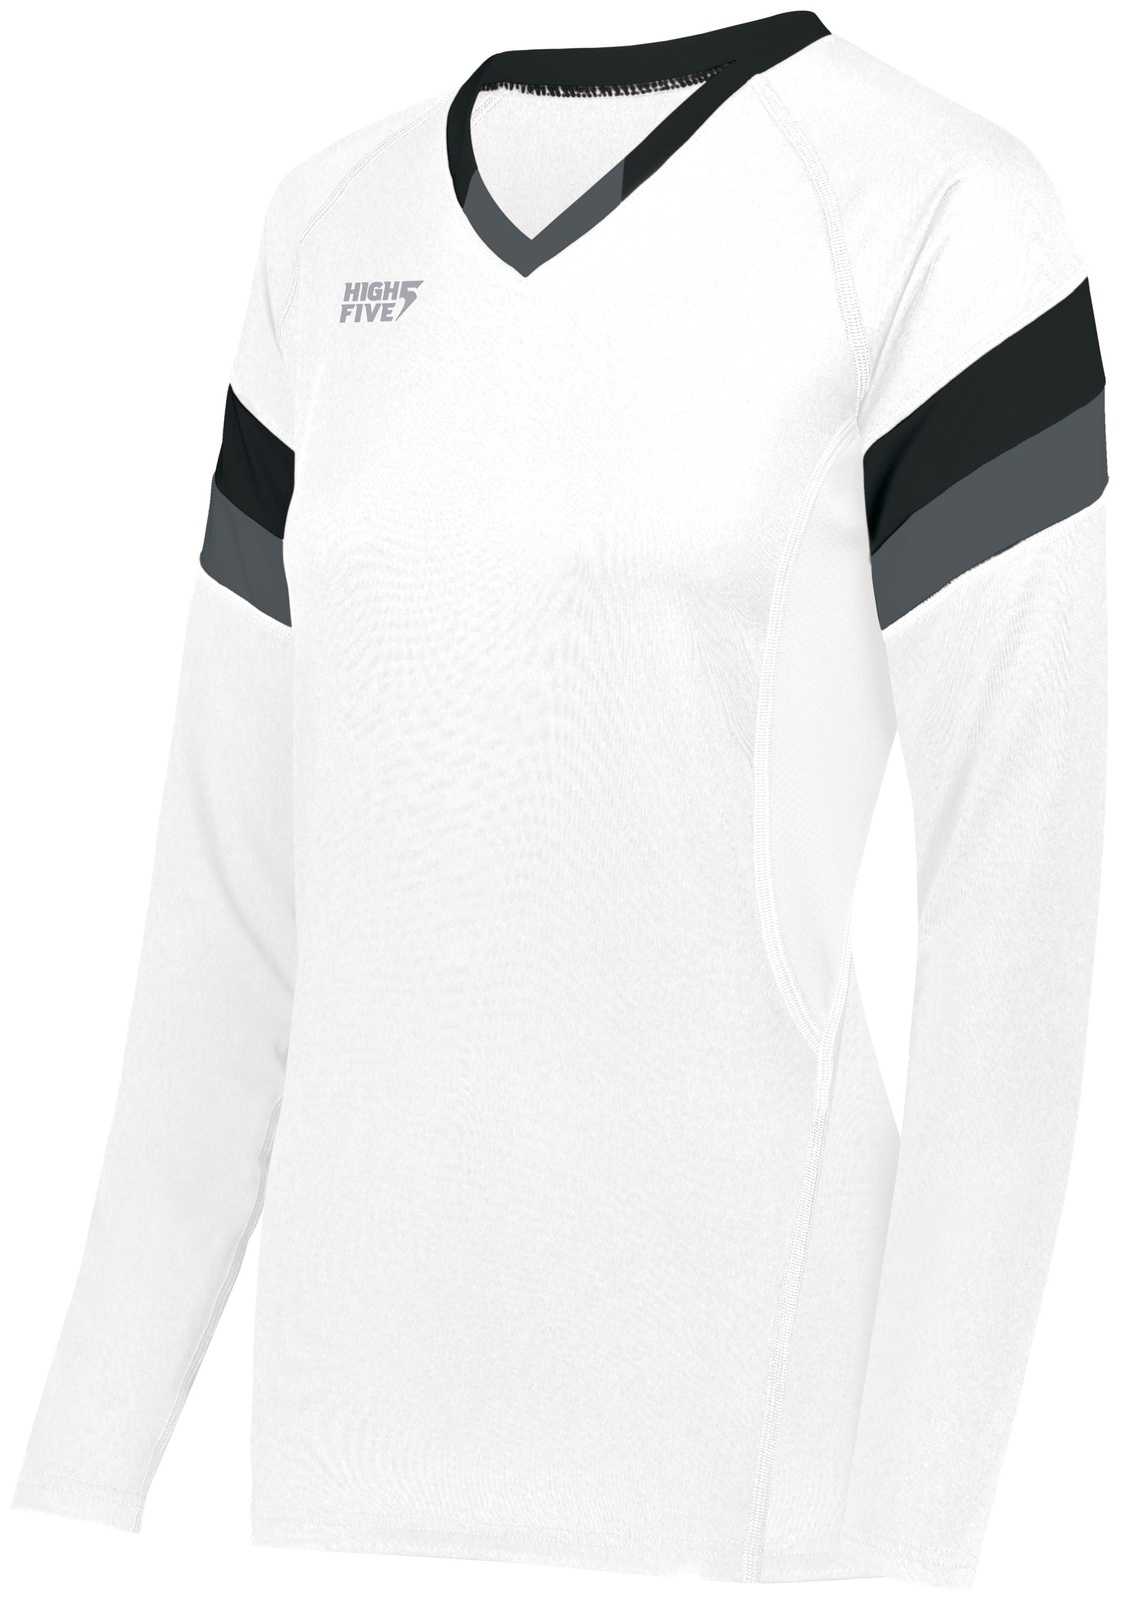 High Five 342242 Ladies TruHit Tri Long Sleeve Jersey - White Black Graphite - HIT a Double